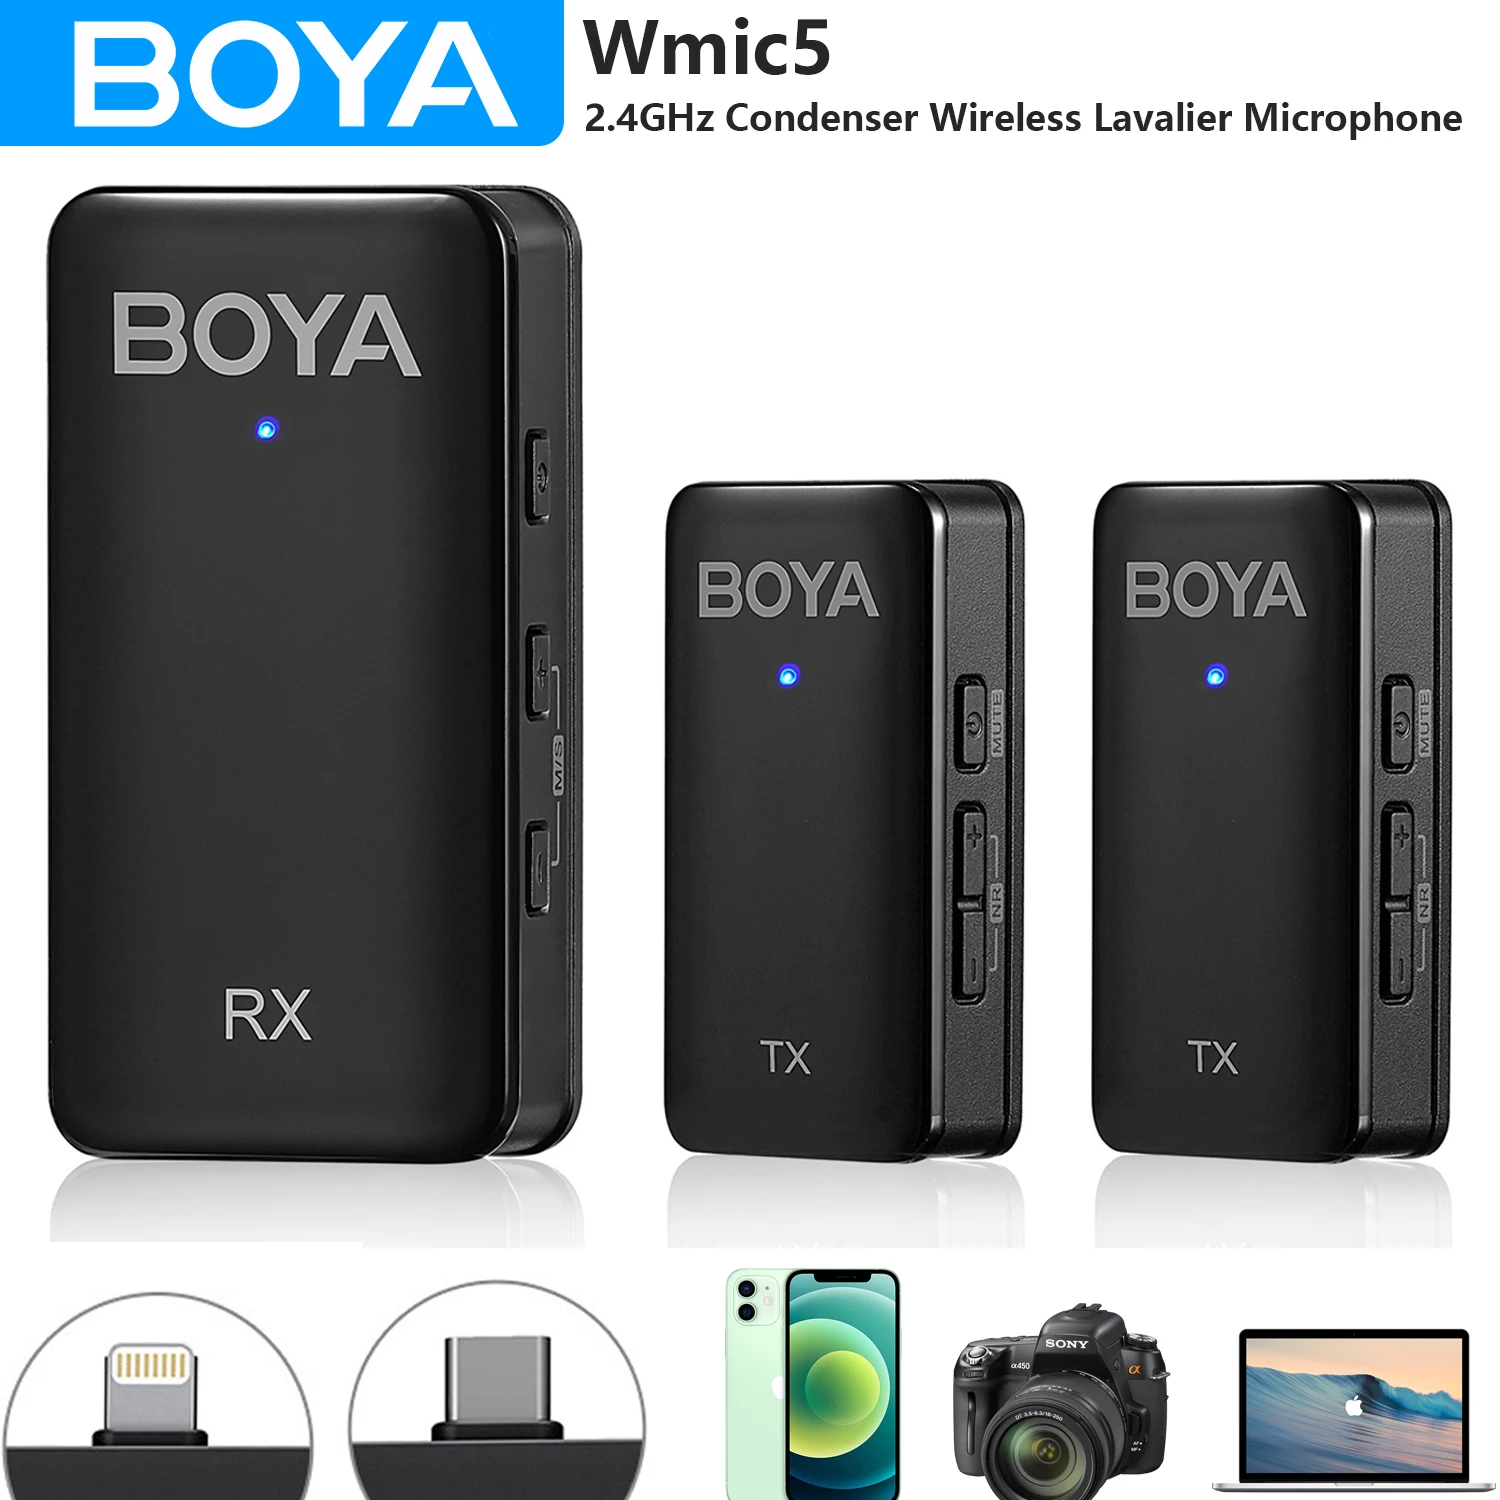 

BOYA WMIC5 Wireless Lavalier Lapel Microphone for iPhone Android DSLR Cameras PC Computer Youtube Recording Live Streaming Vlog